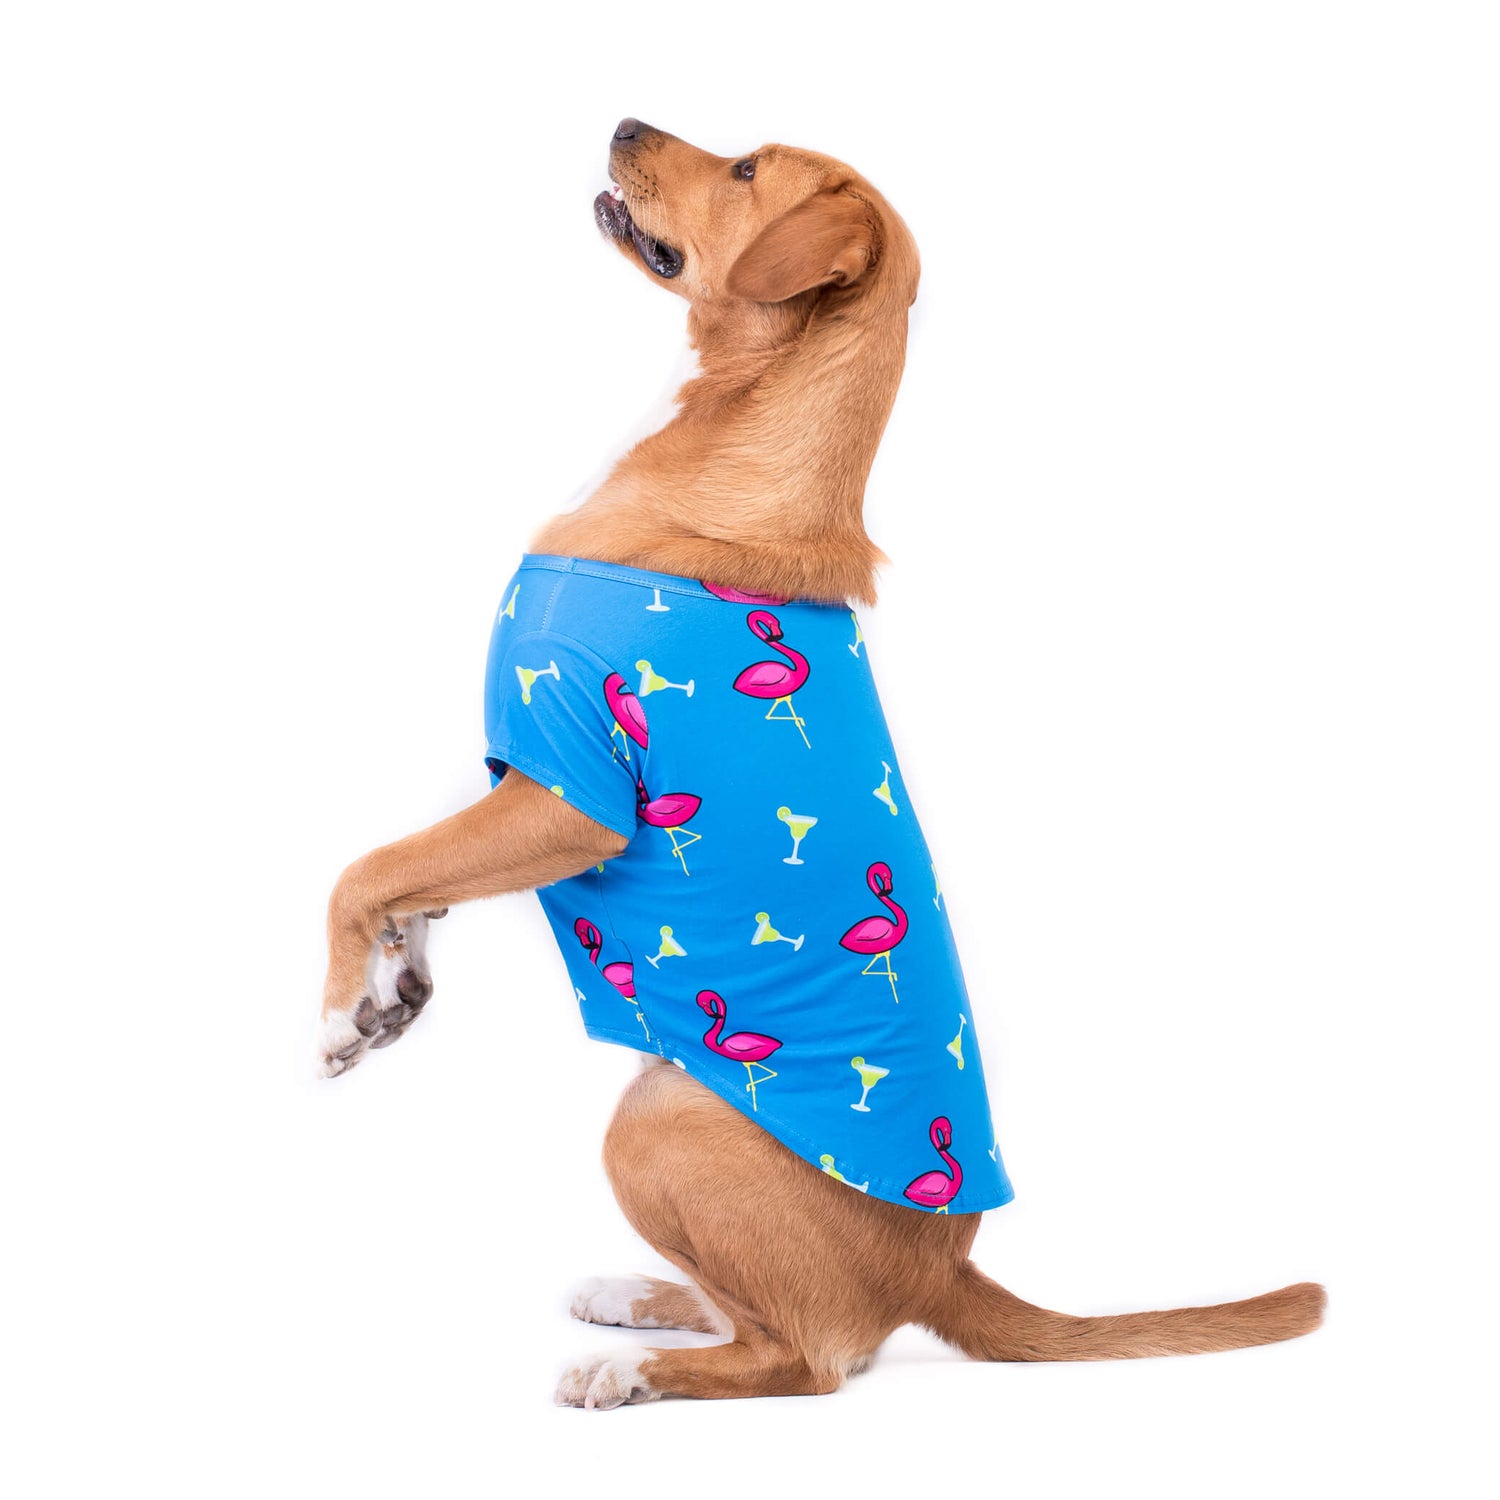 A Golden Retriever dog stands on its hind legs, wearing a blue dog shirt with a pattern named 'Flamingo Splash.' The shirt features pink flamingos and margaritas printed on a vibrant blue background.